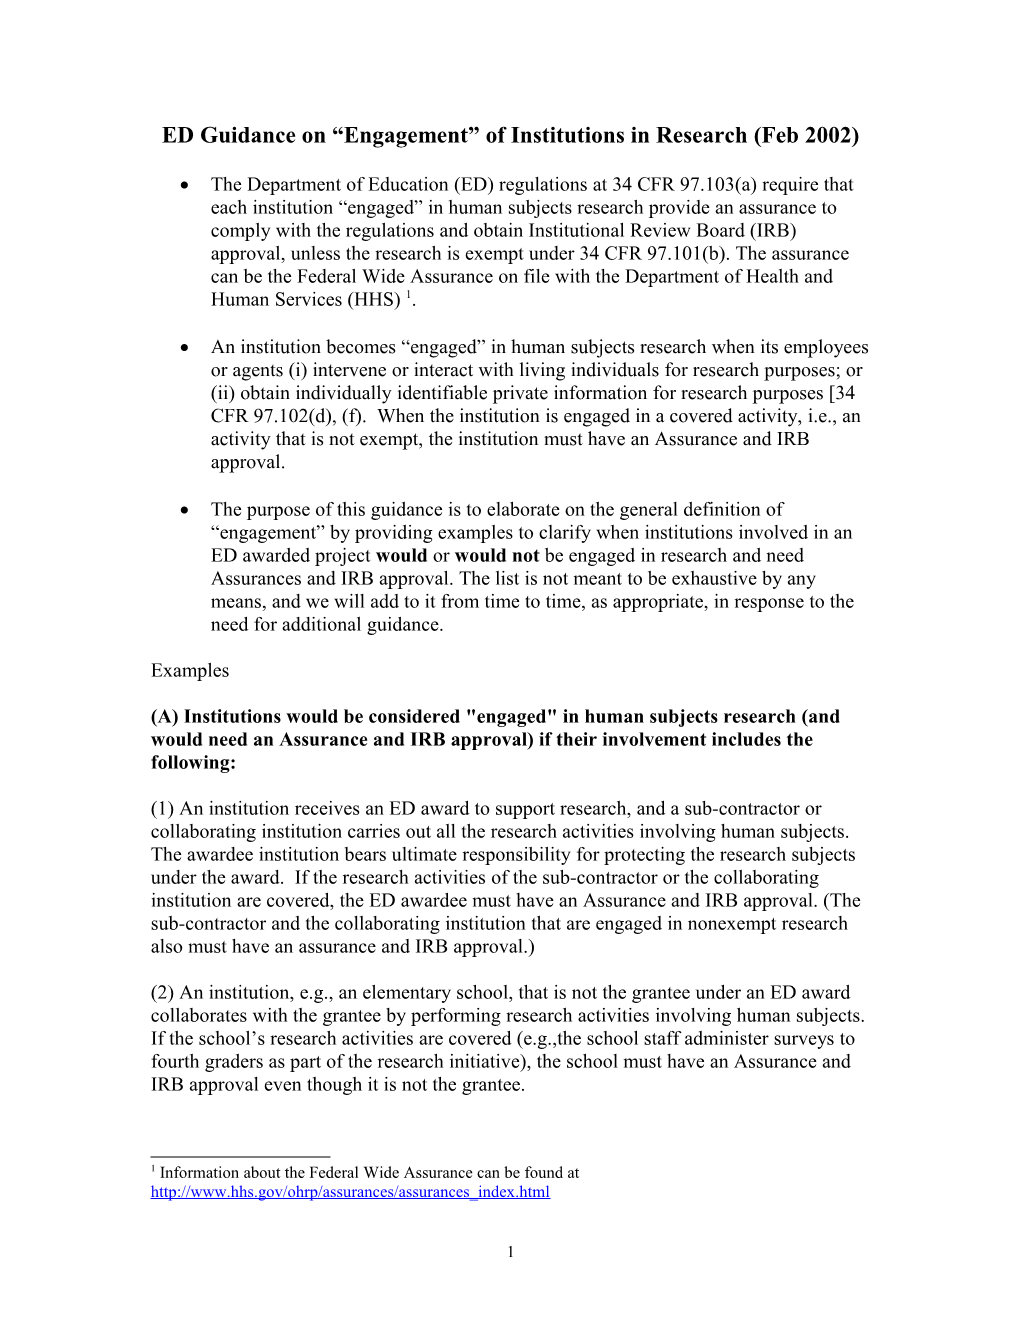 ED Guidance on Engagement of Institutions in Research - Feb 2002 (MS Word)